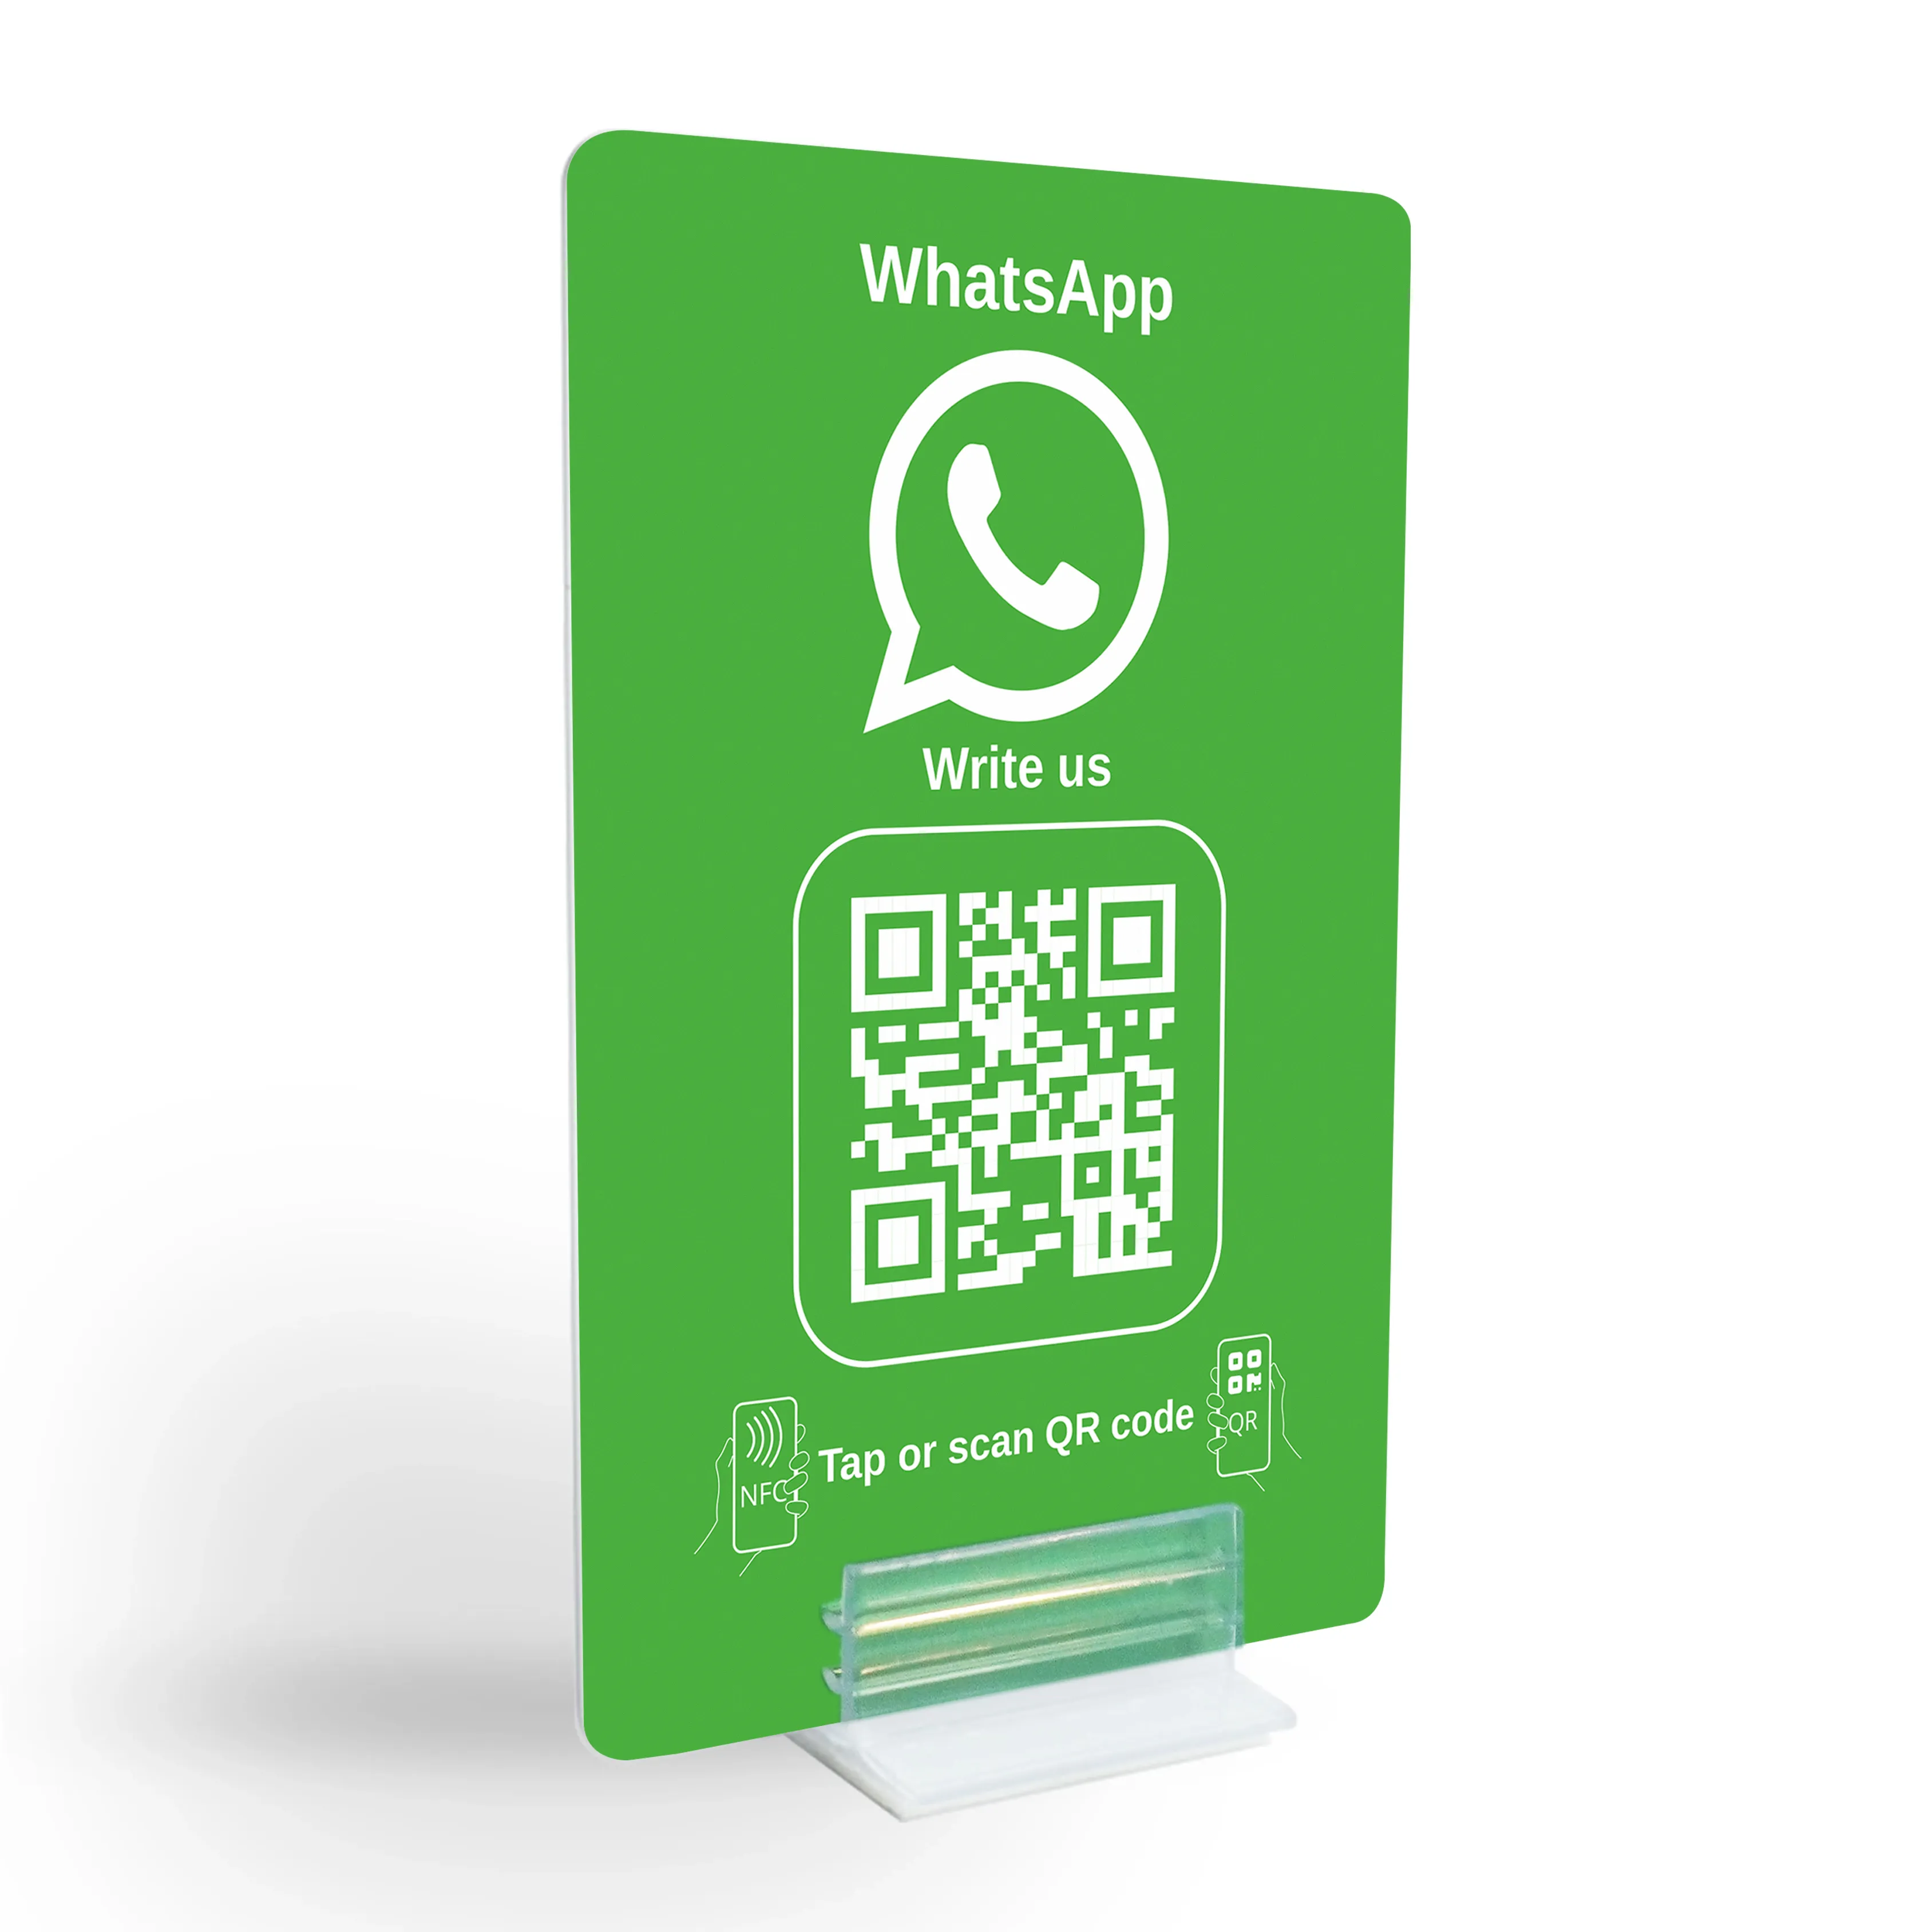 WhatsApp Direct Connect - NFC/QR code display for instant customer contact